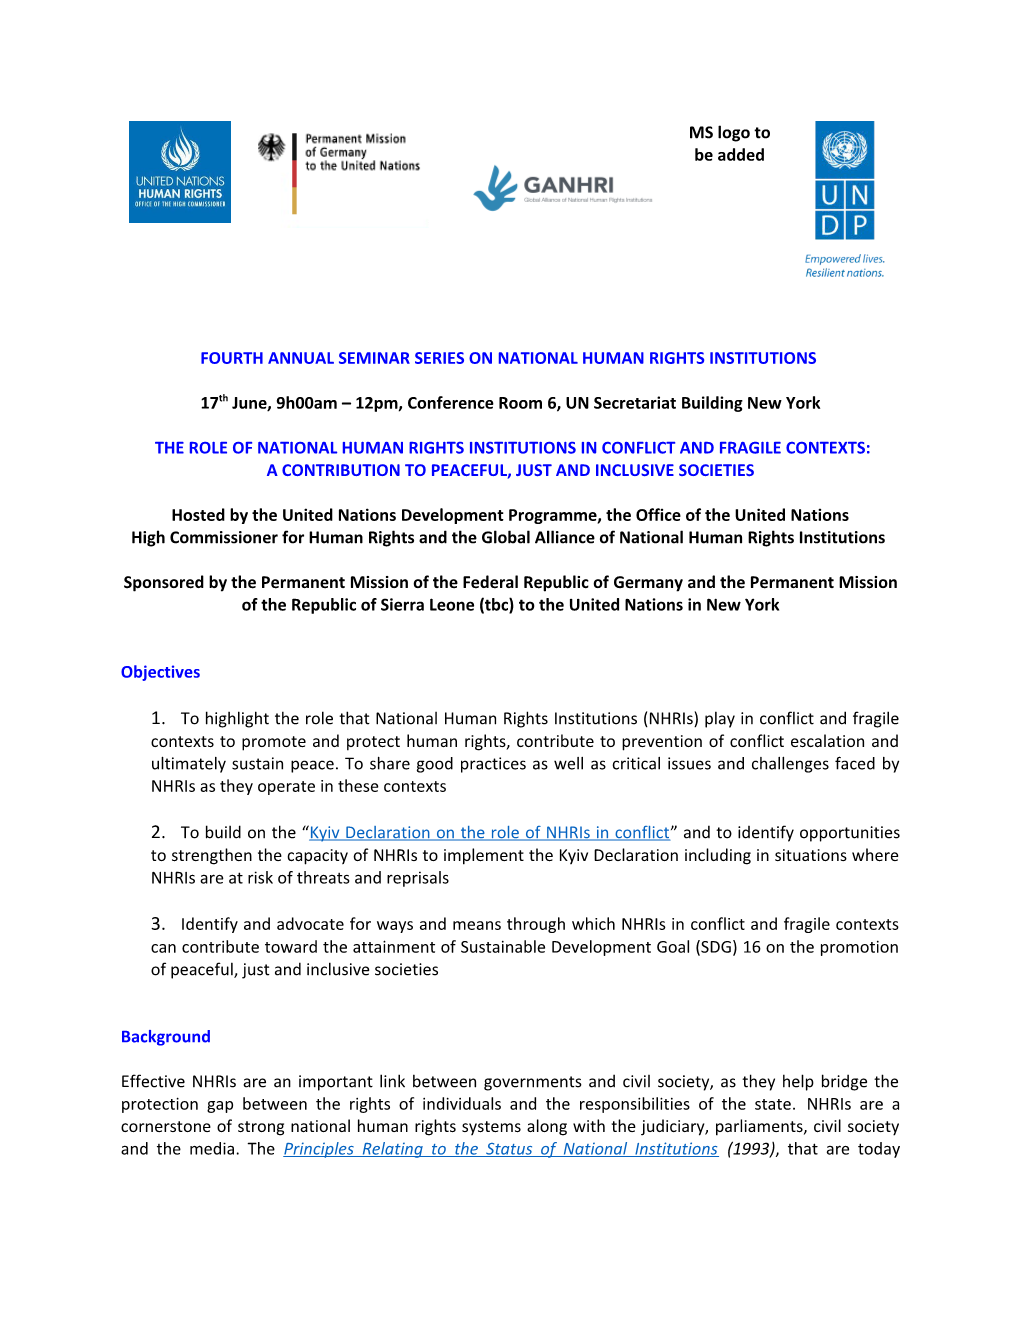 4Th UNDP-OHCHR-GANHRI Annual Seminar Series: the Role of Nhris in Conflict and Fragile Contexts